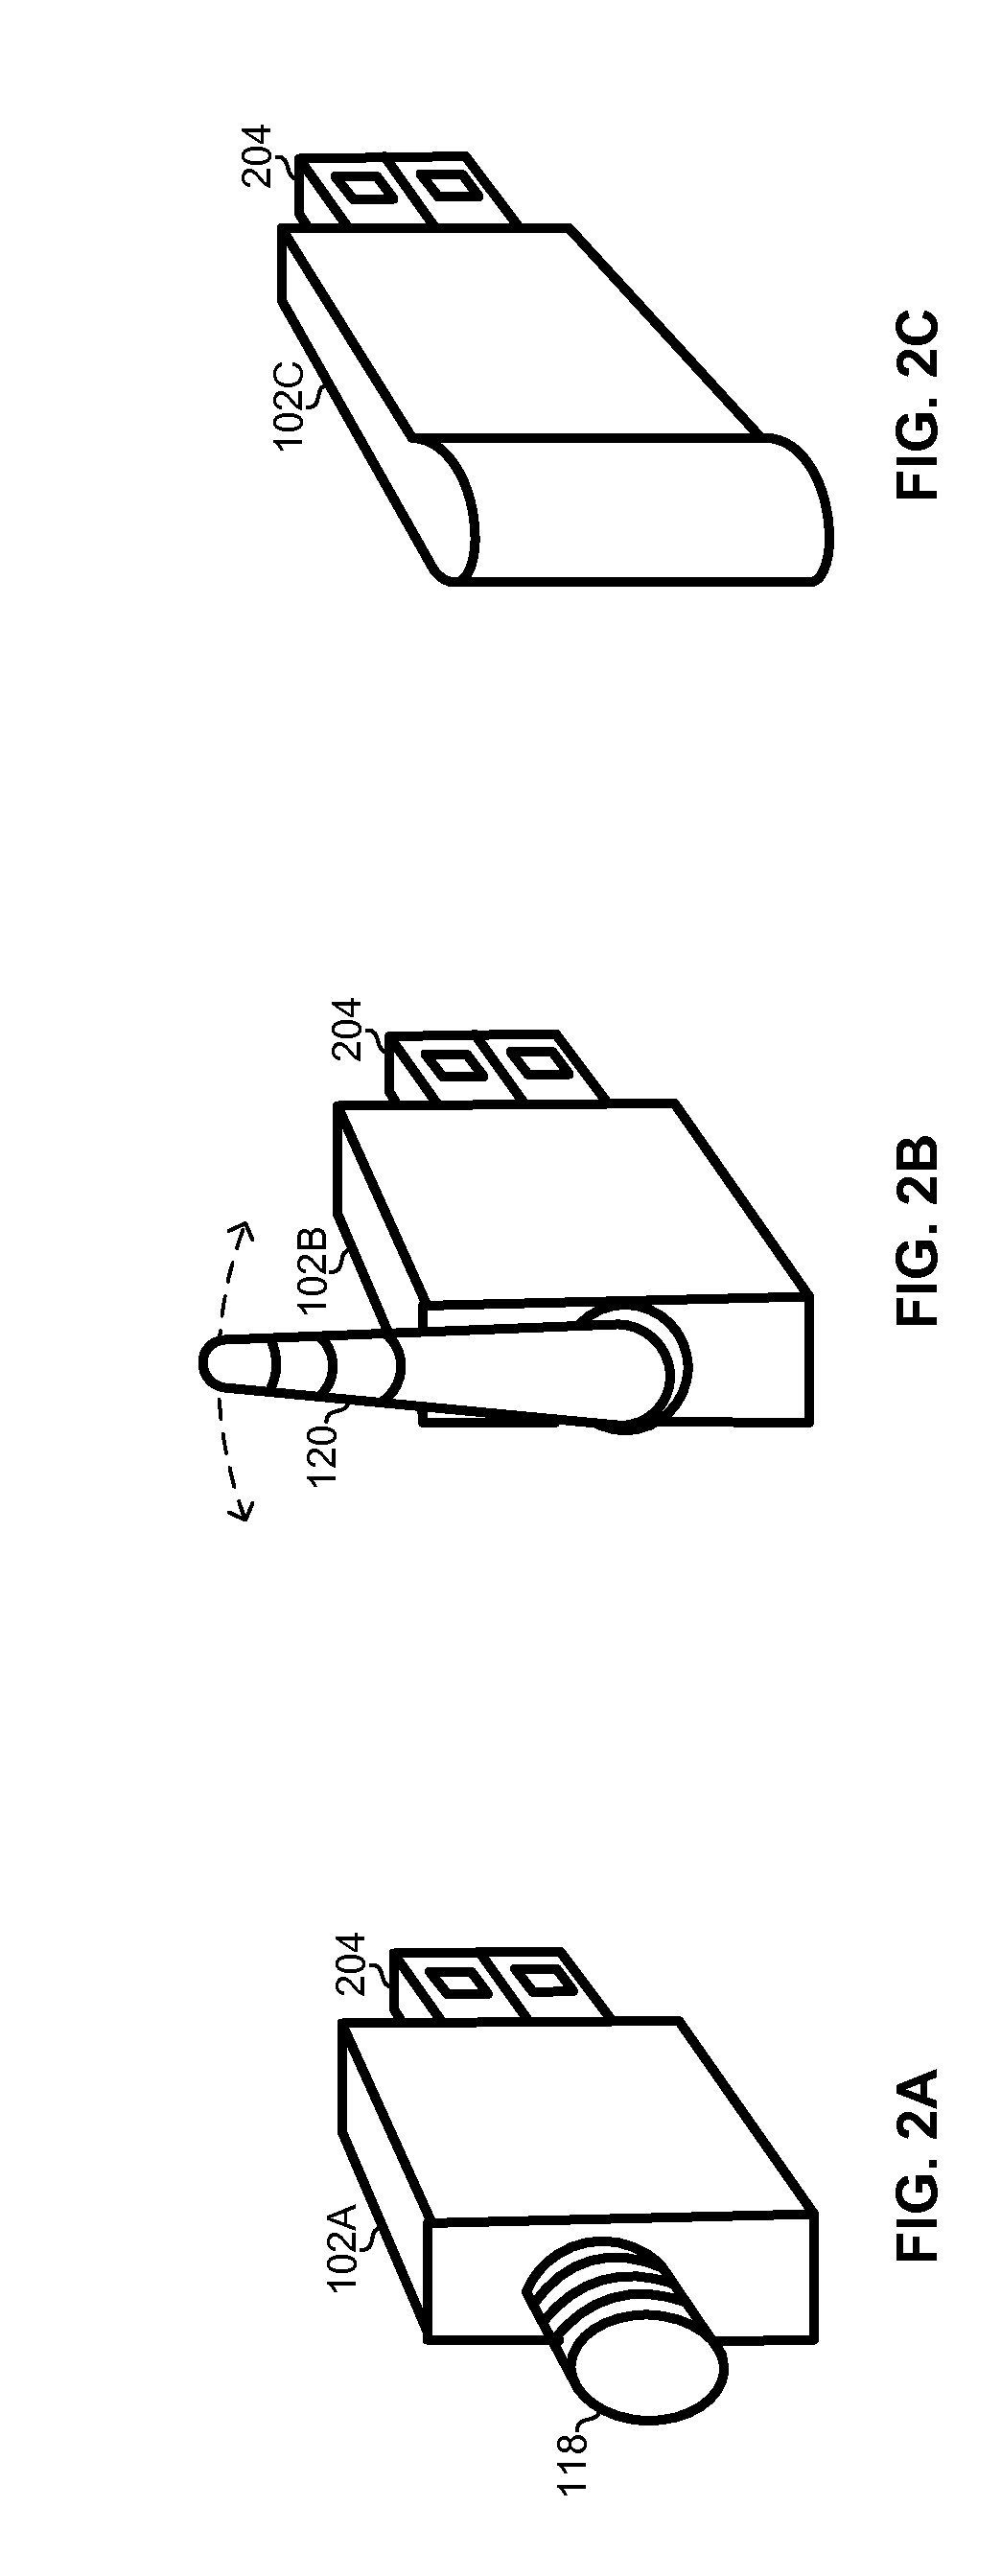 Method and apparatus for plug and play, networkable iso 18000-7 connectivity